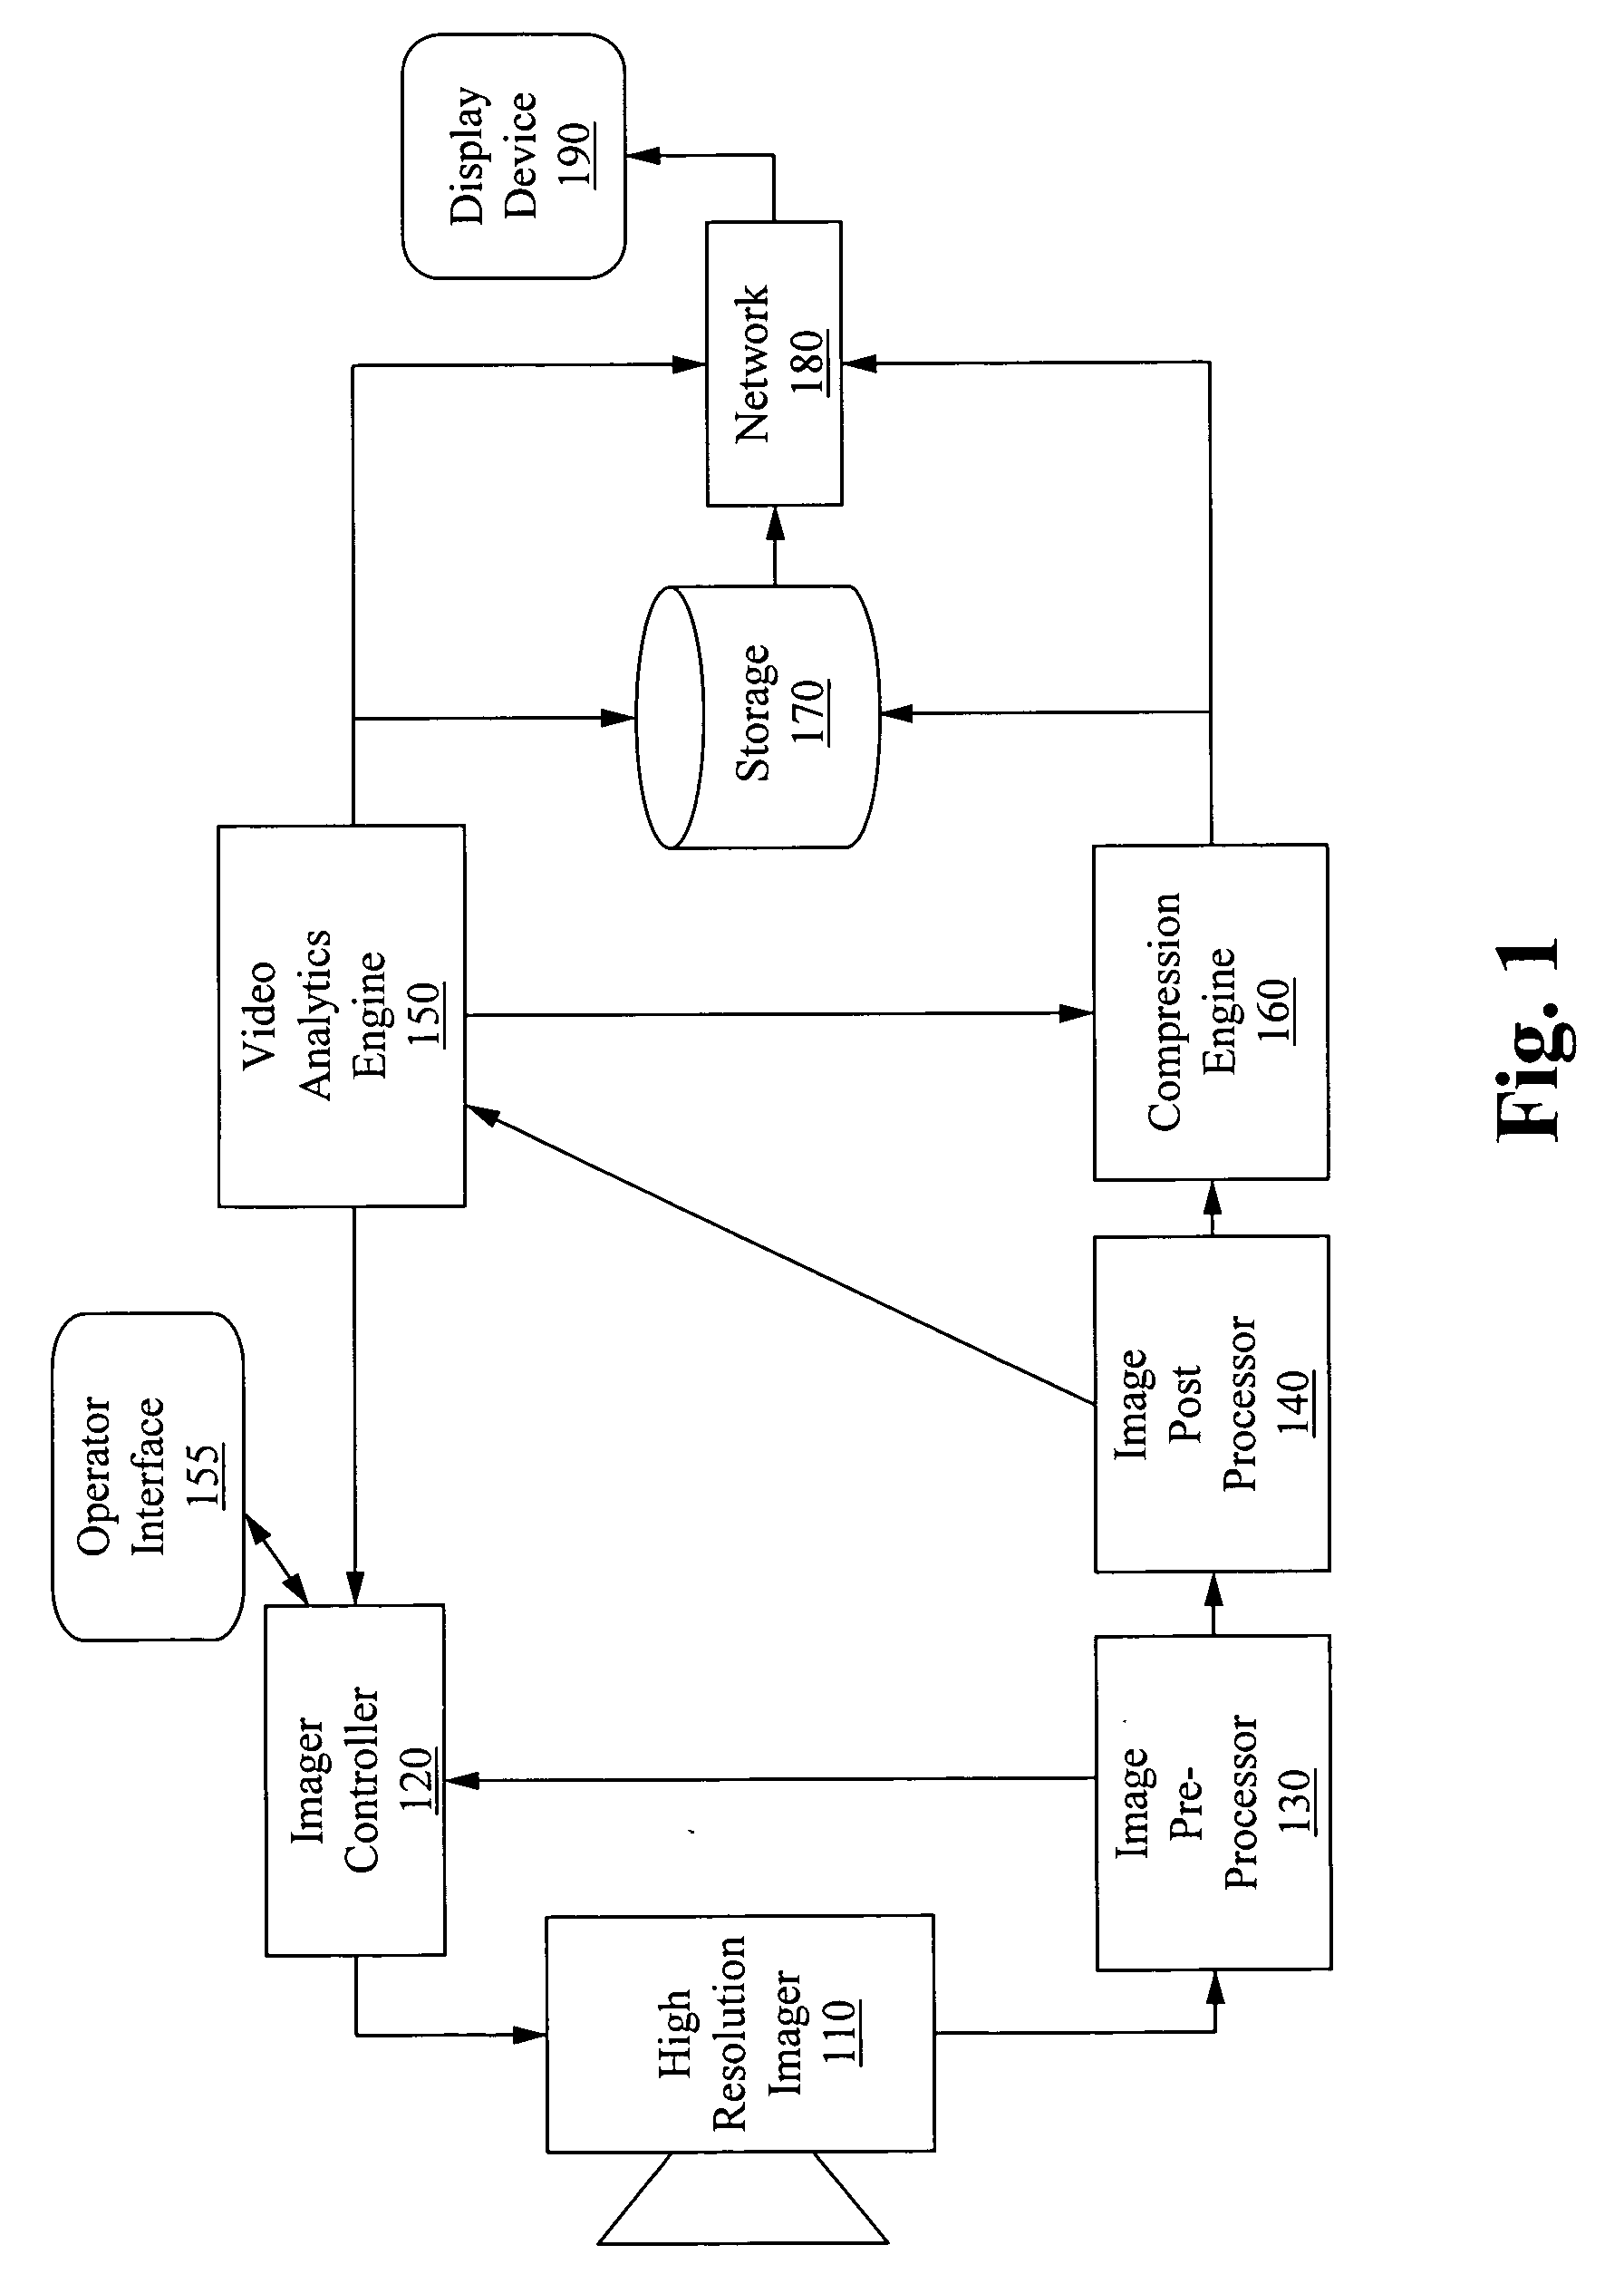 Apparatus for image capture with automatic and manual field of interest processing with a multi-resolution camera